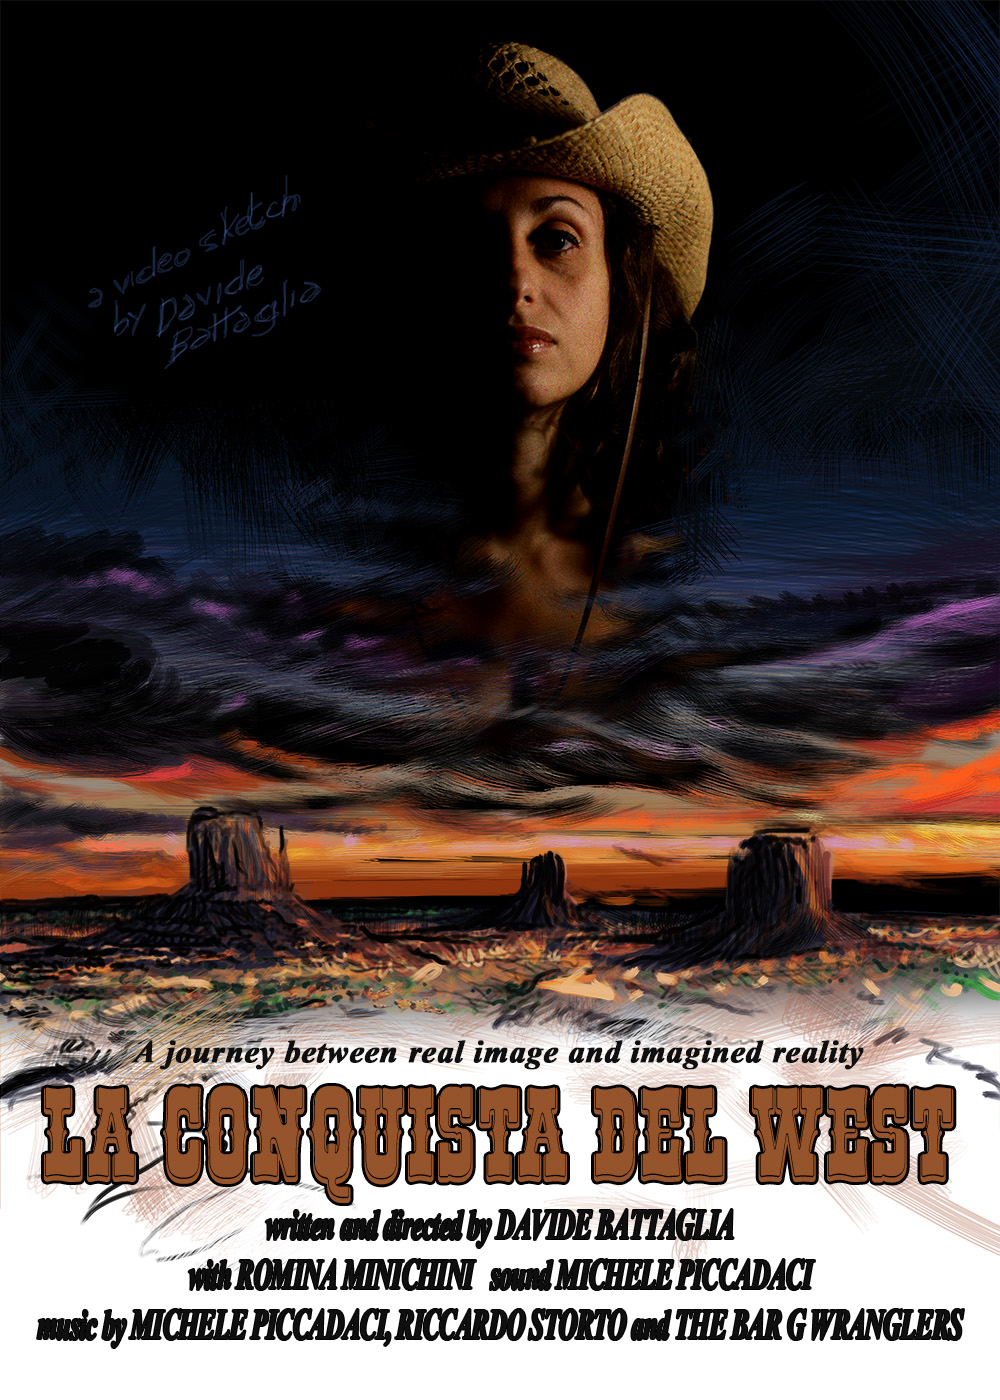 
Producer and director of the documentary 'The Conquest of the West' (2016).
Poster
